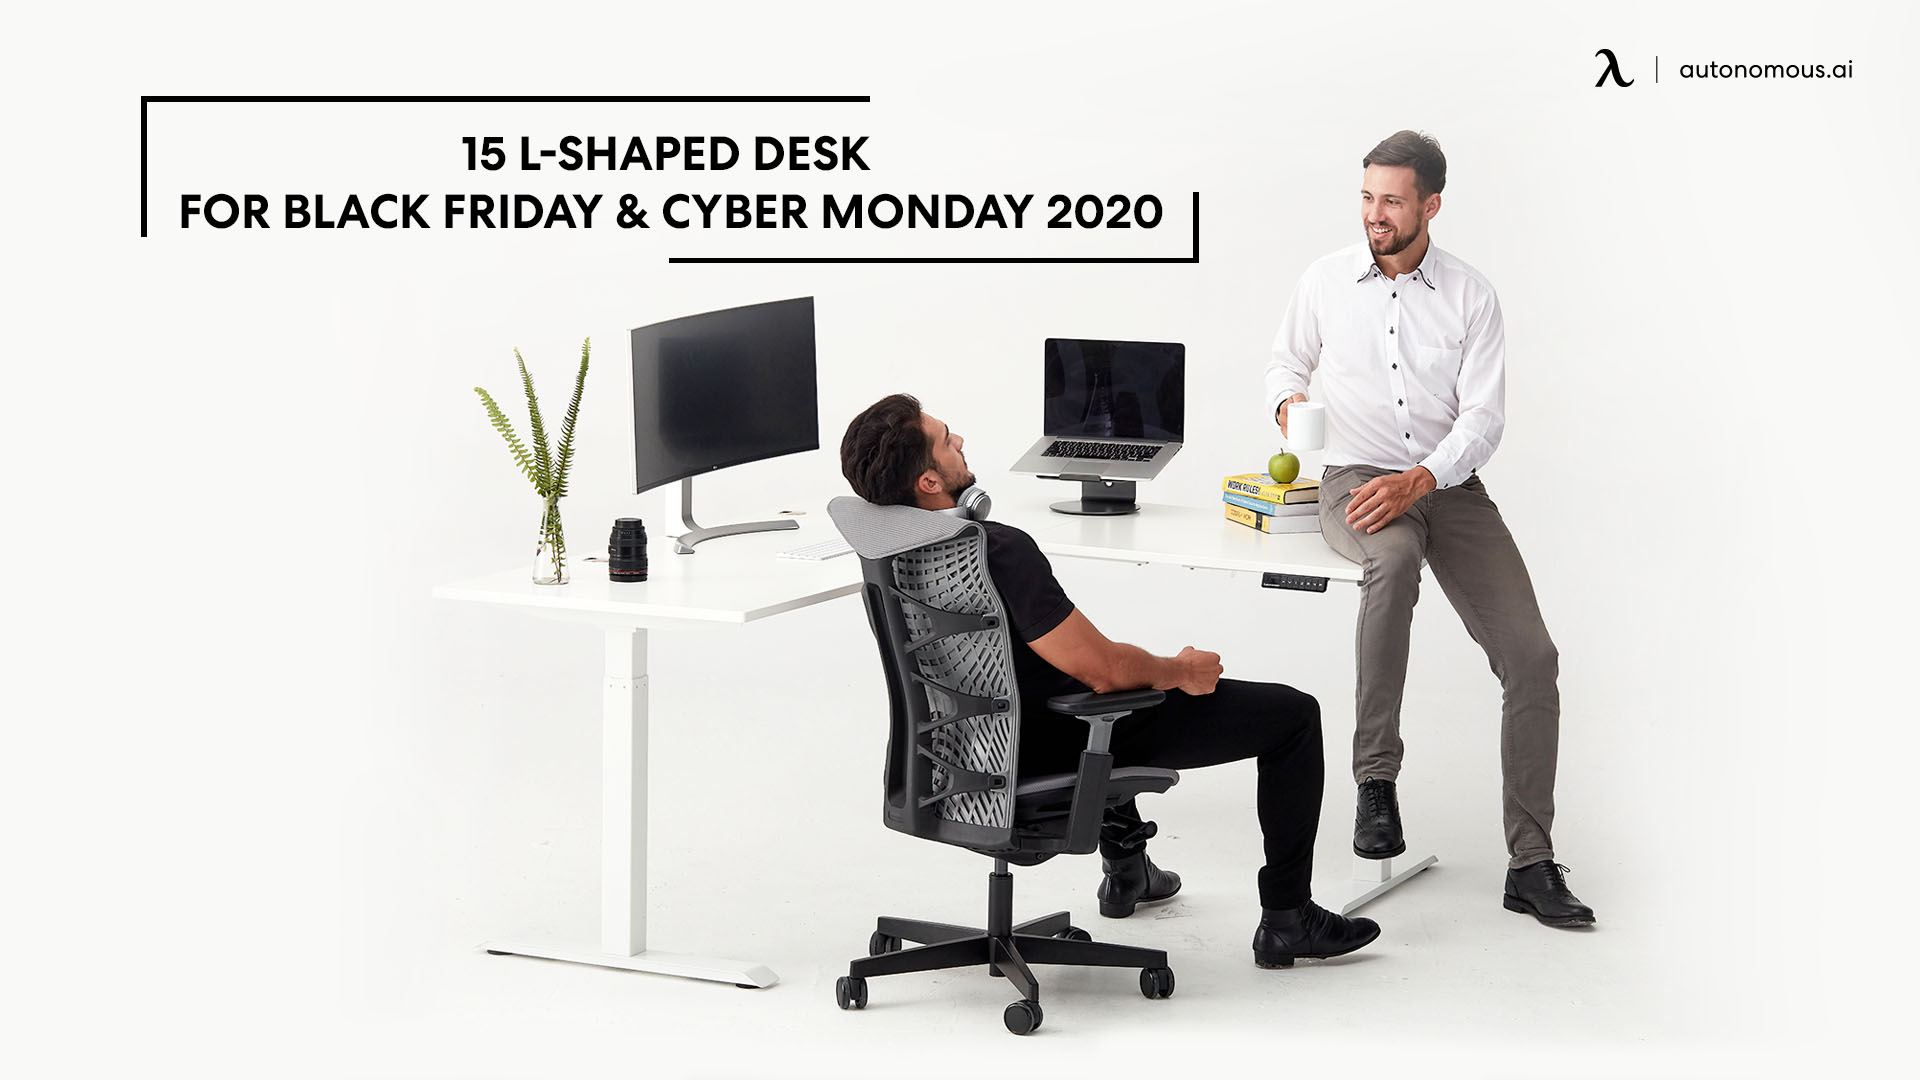 15 L-Shaped Desk for Black Friday & Cyber Monday